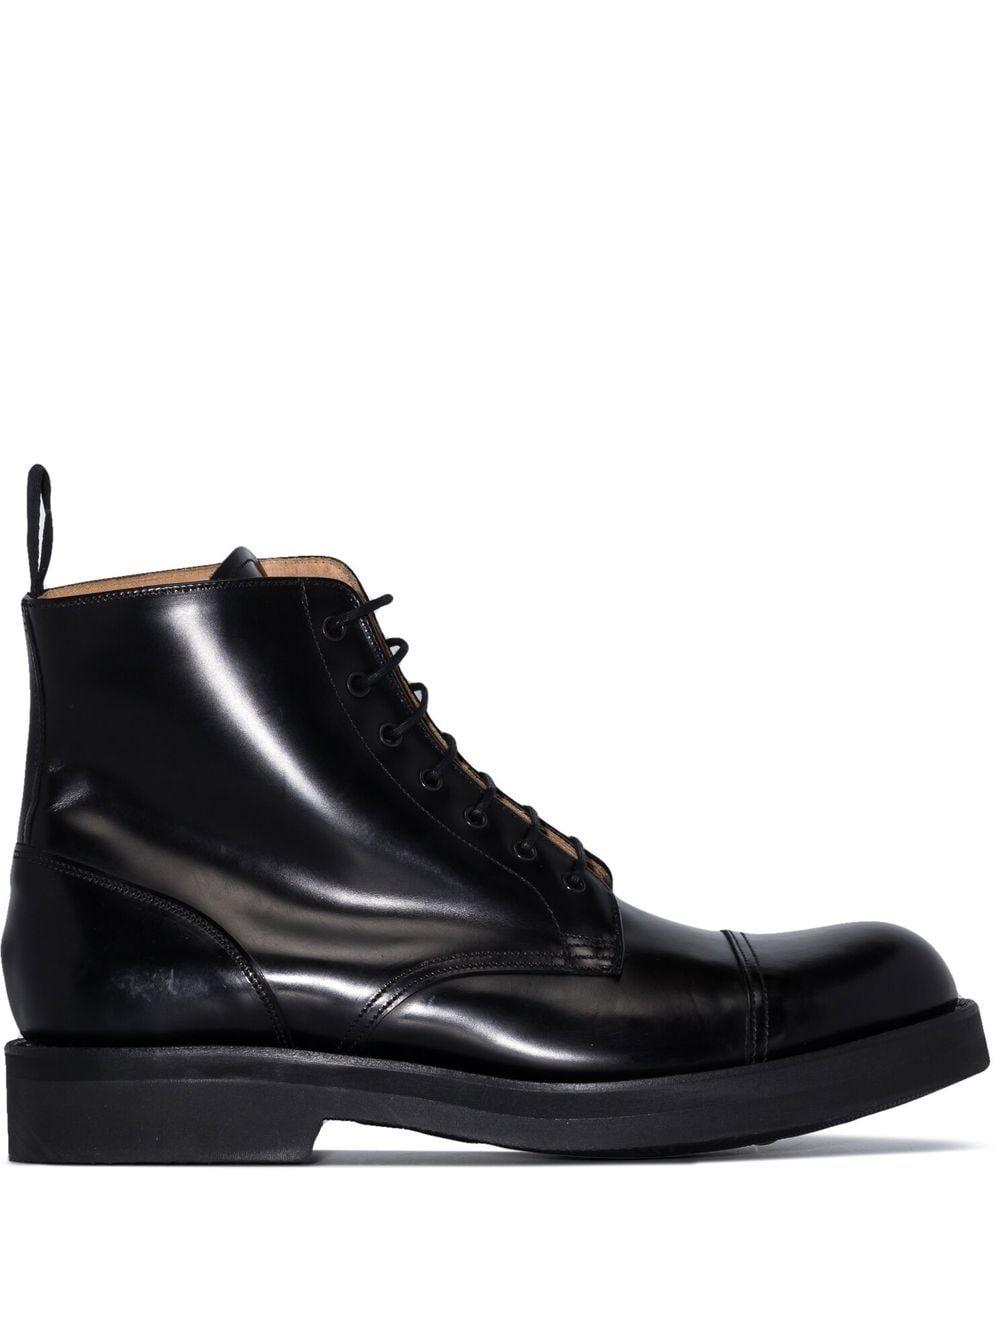 Grenson Leather Desmond Oxford Boots in Black for Men | Lyst Canada